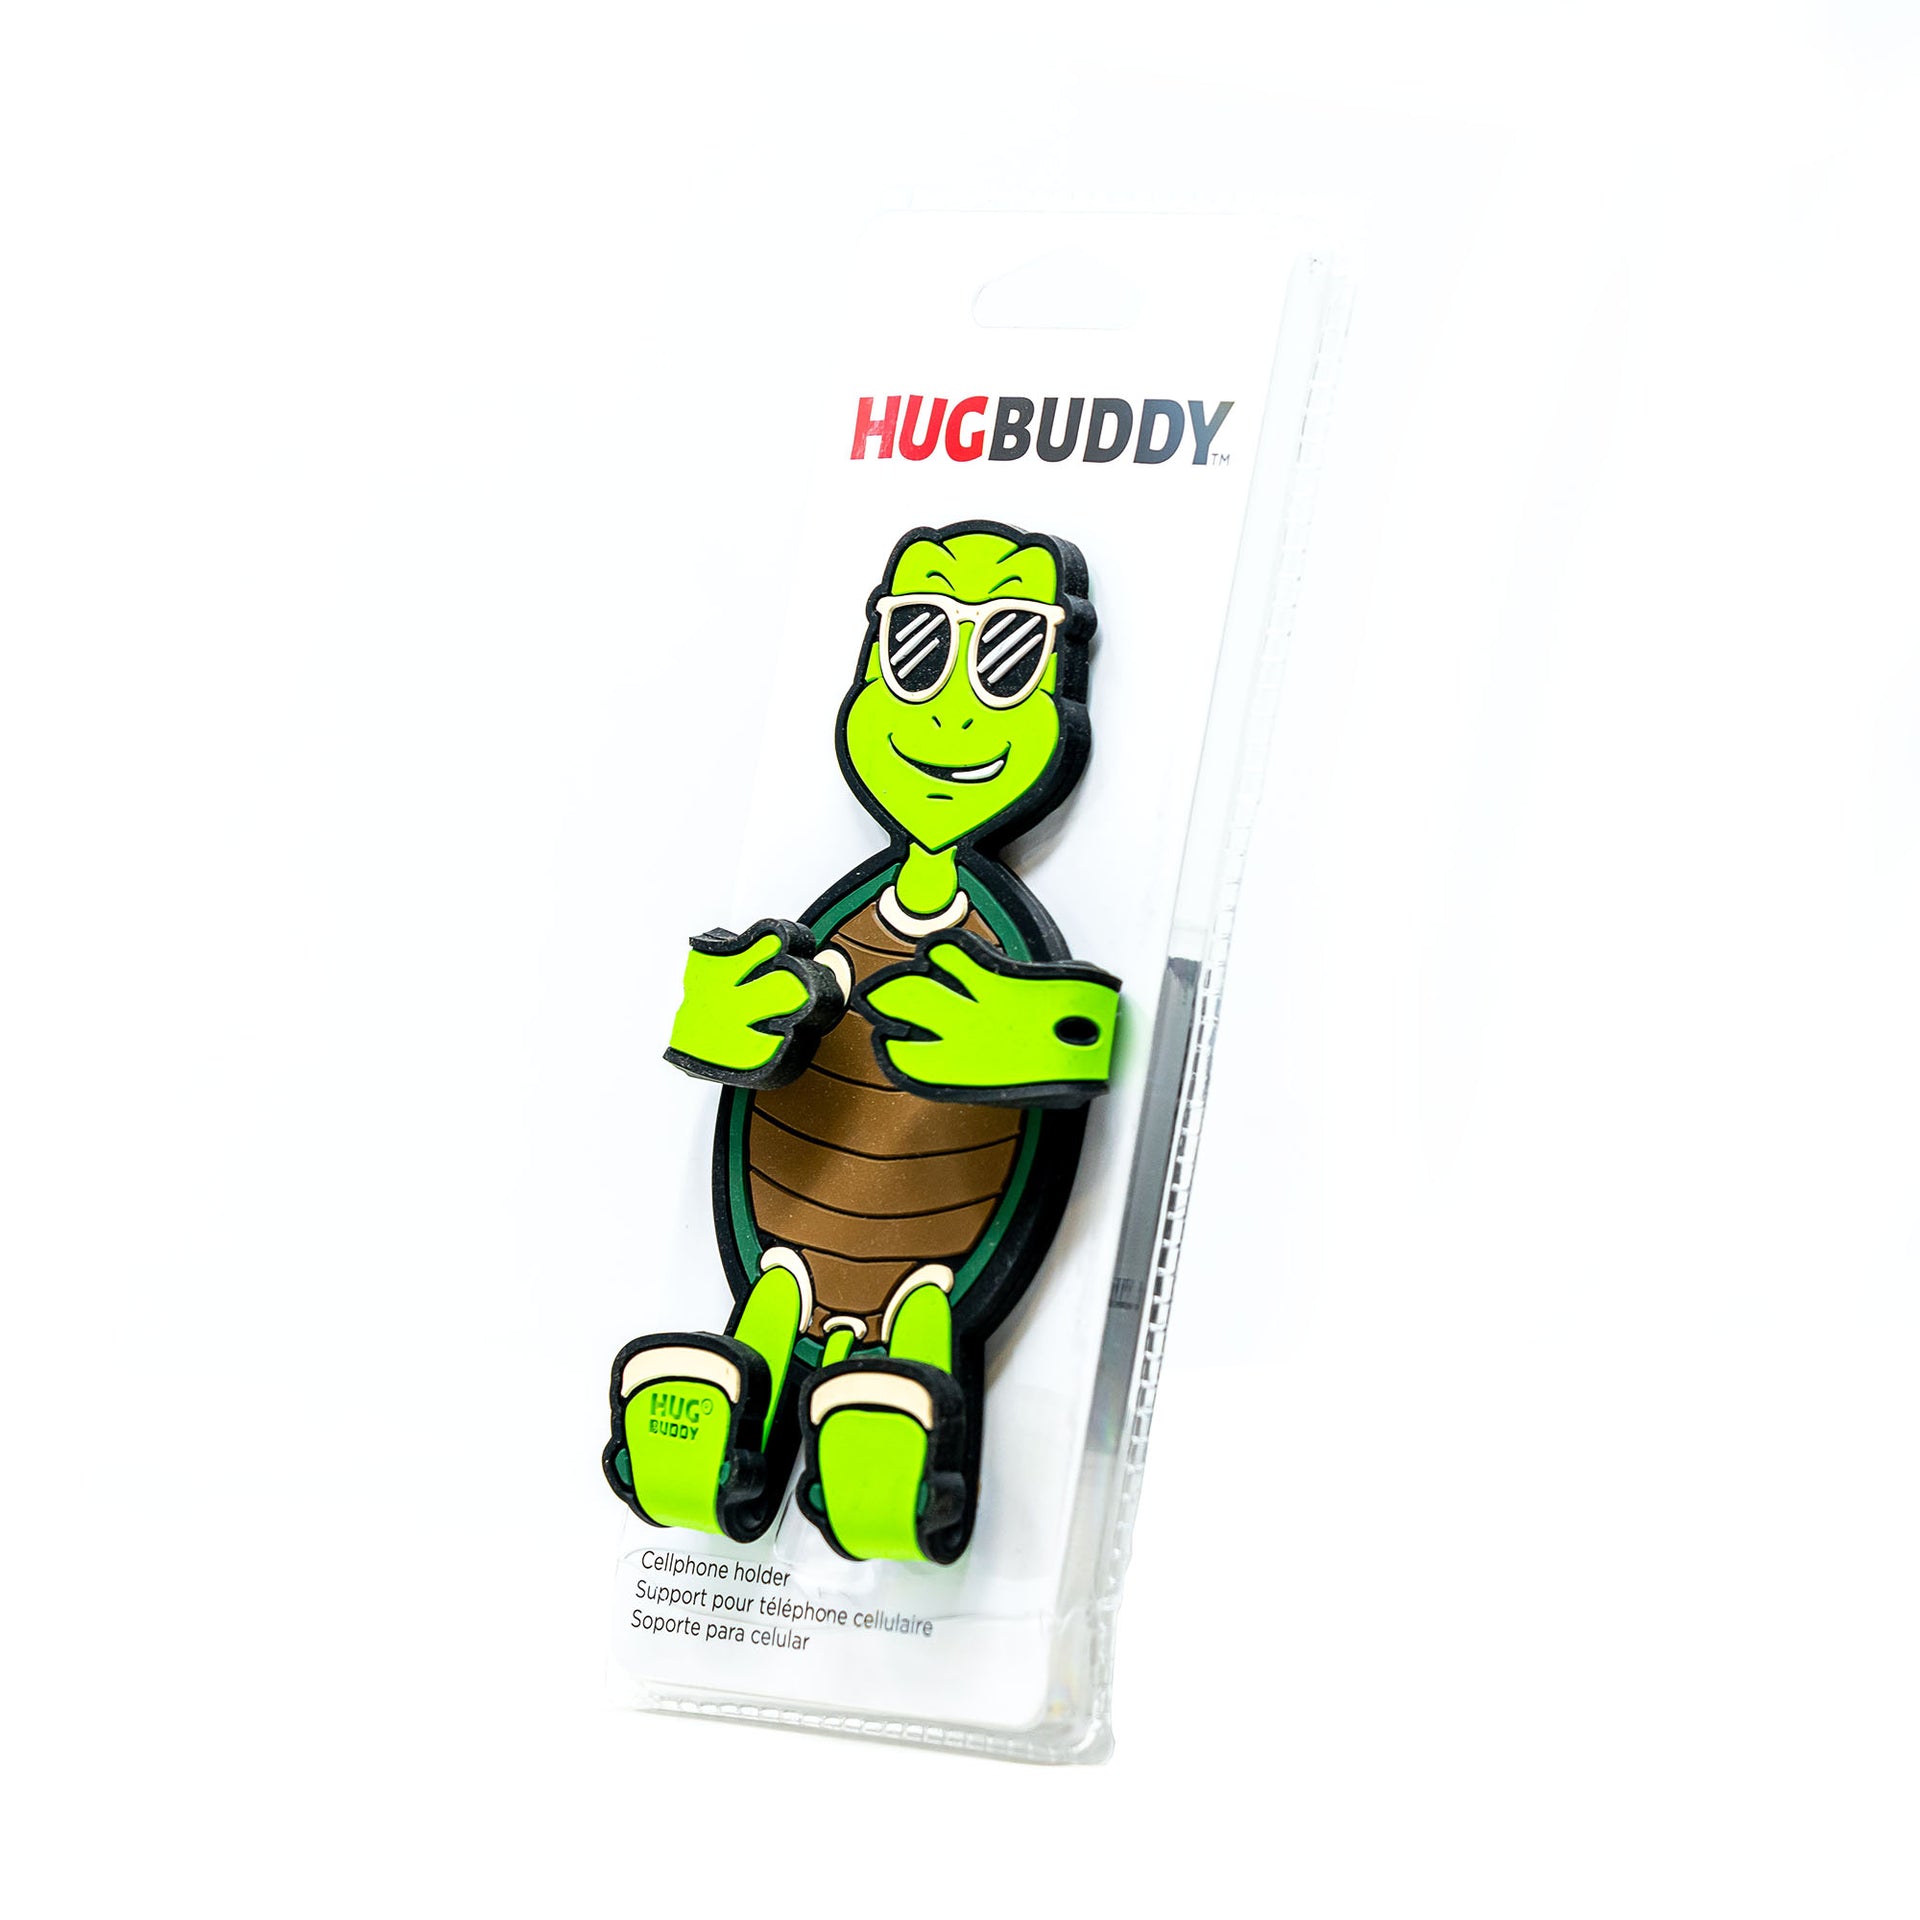 Image of Shellebrity the Turtle Hug Buddy packaging, 45 degree angle view